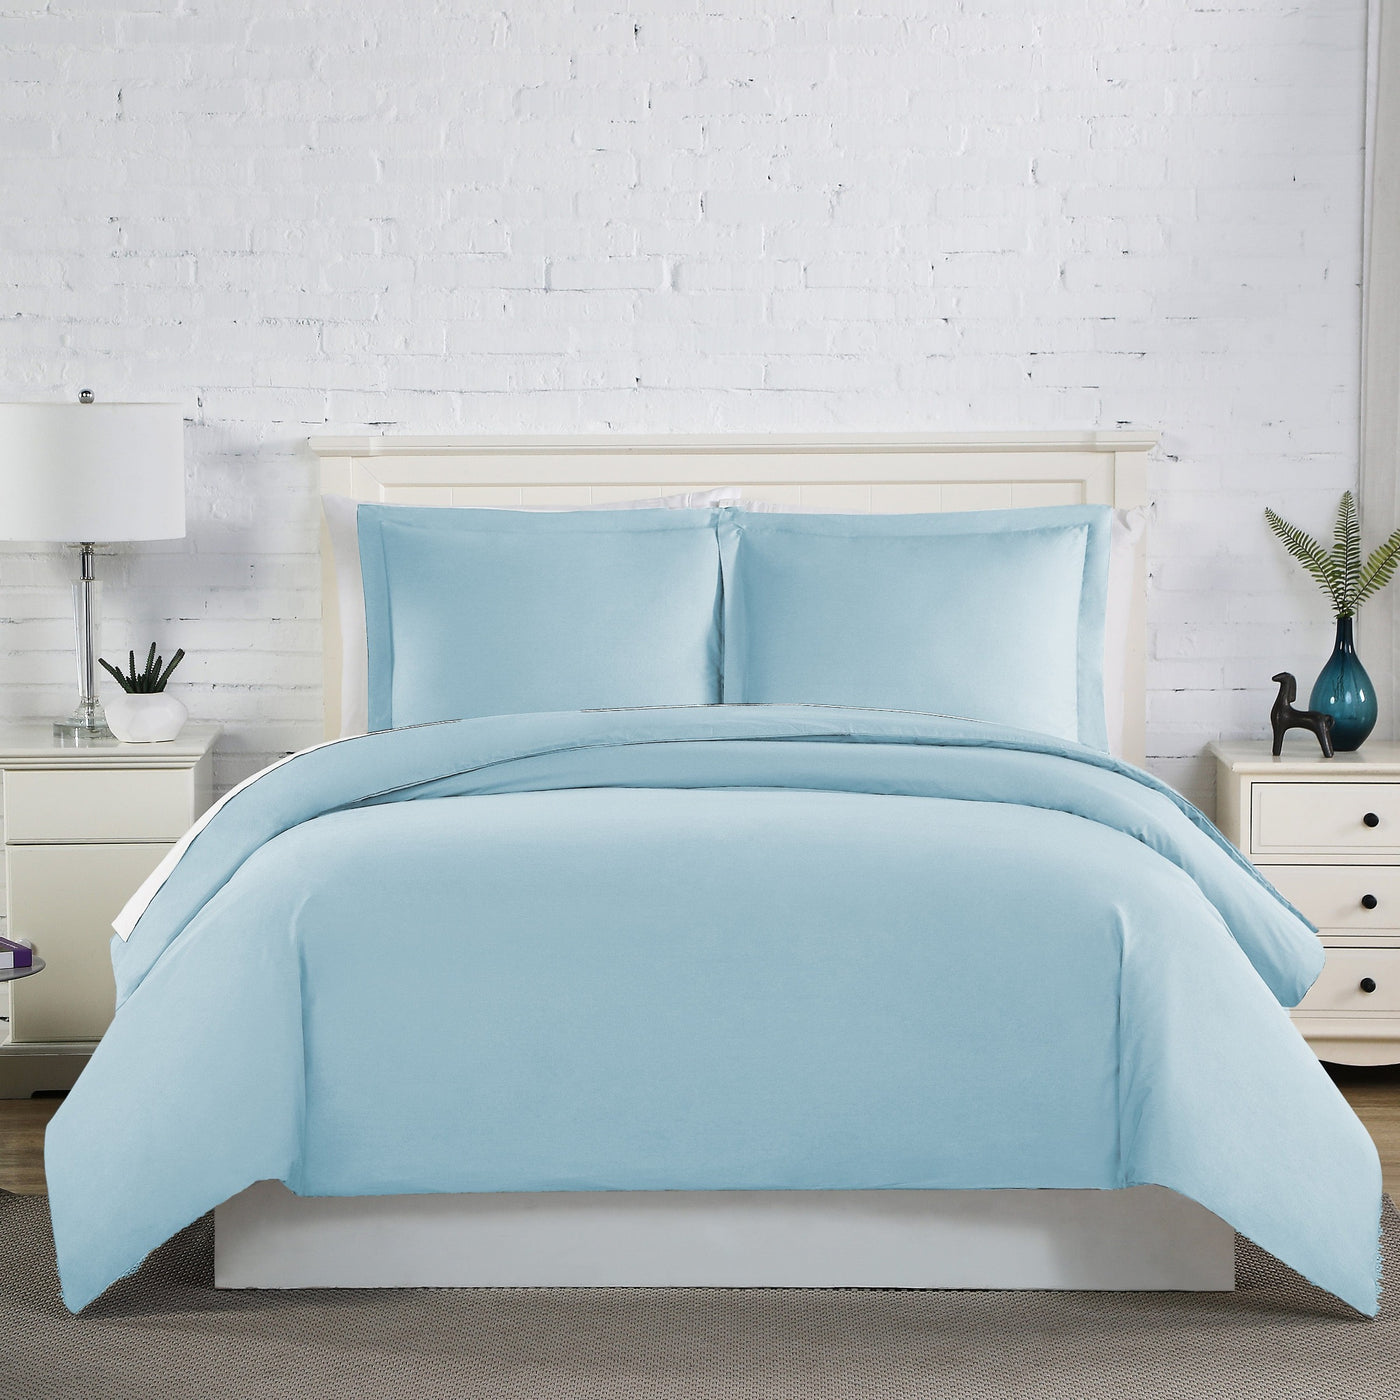 Front View of Everyday Essentials Duvet Cover Set in Light Blue#color_sky-blue